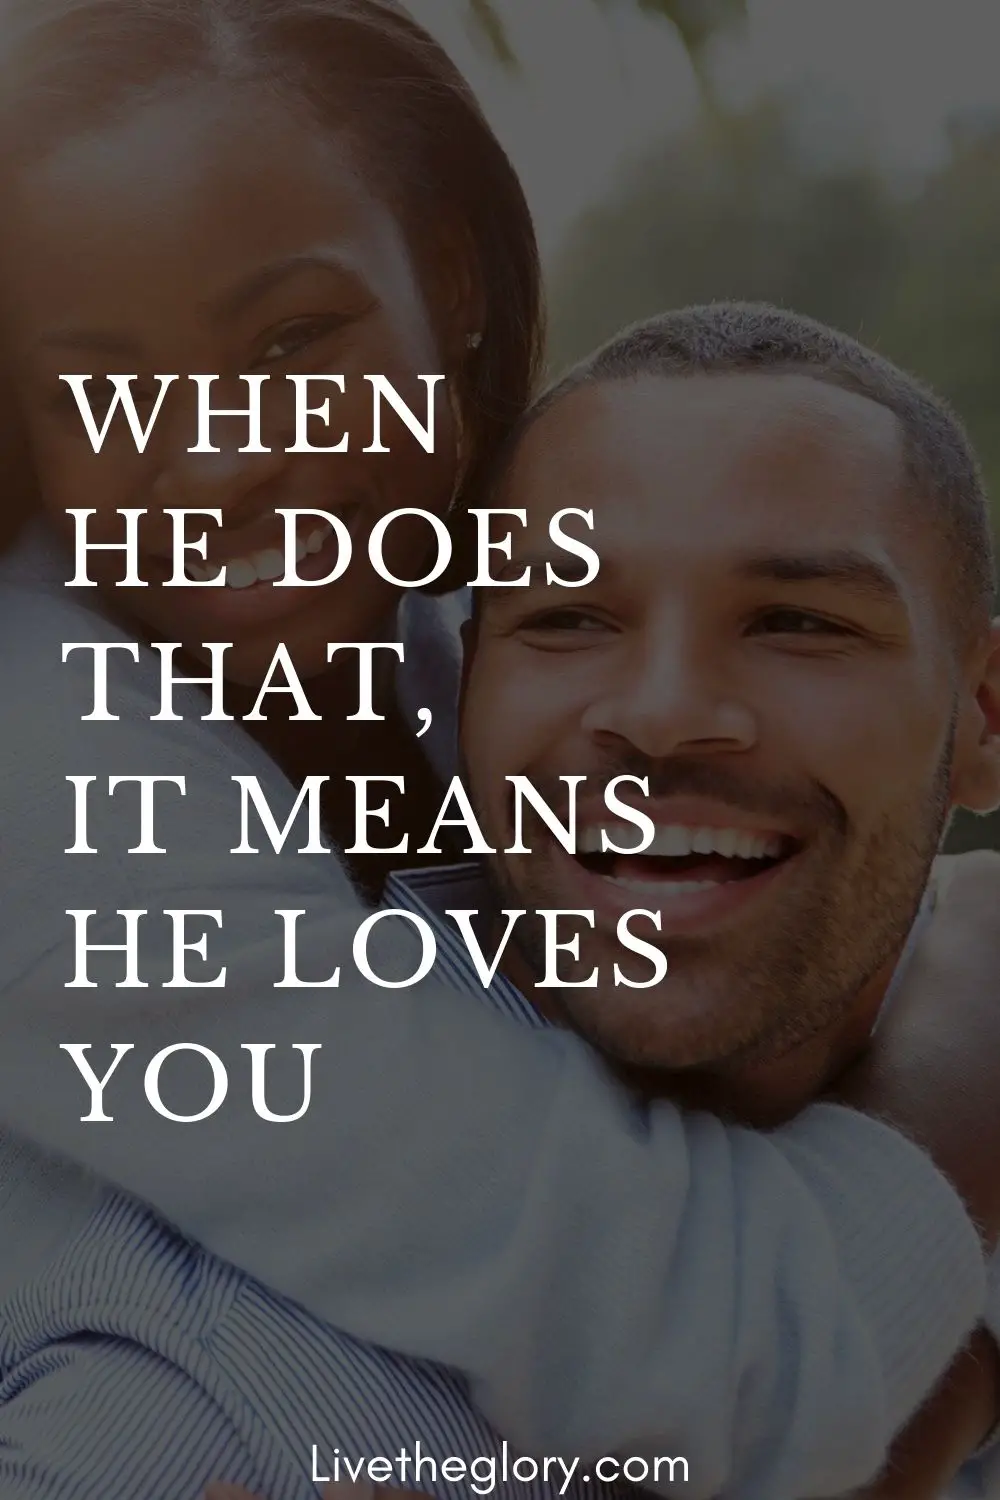 When he does that, it means he loves you - Live the glory